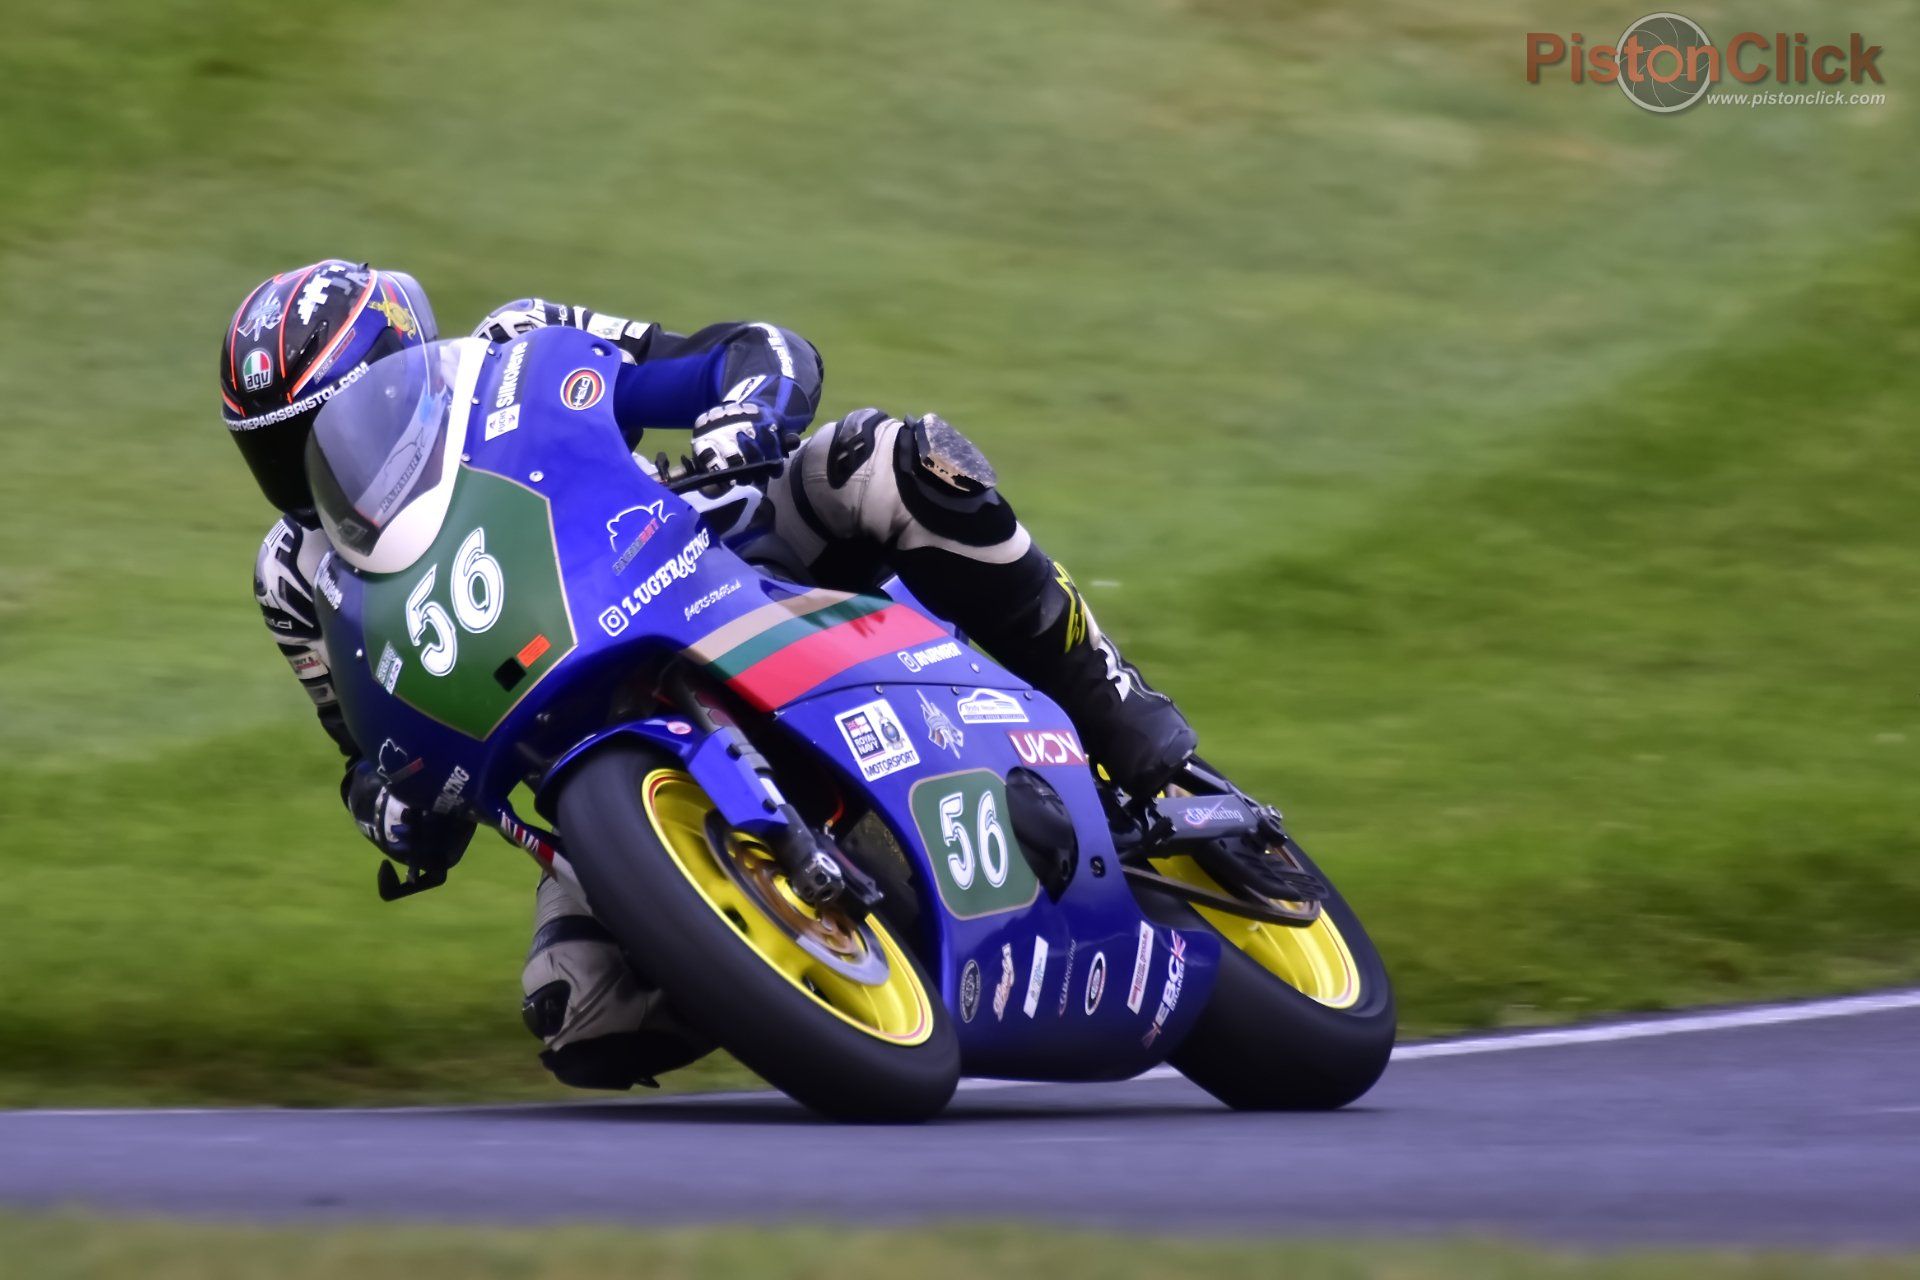 Inter-Services Motorcycle Racing